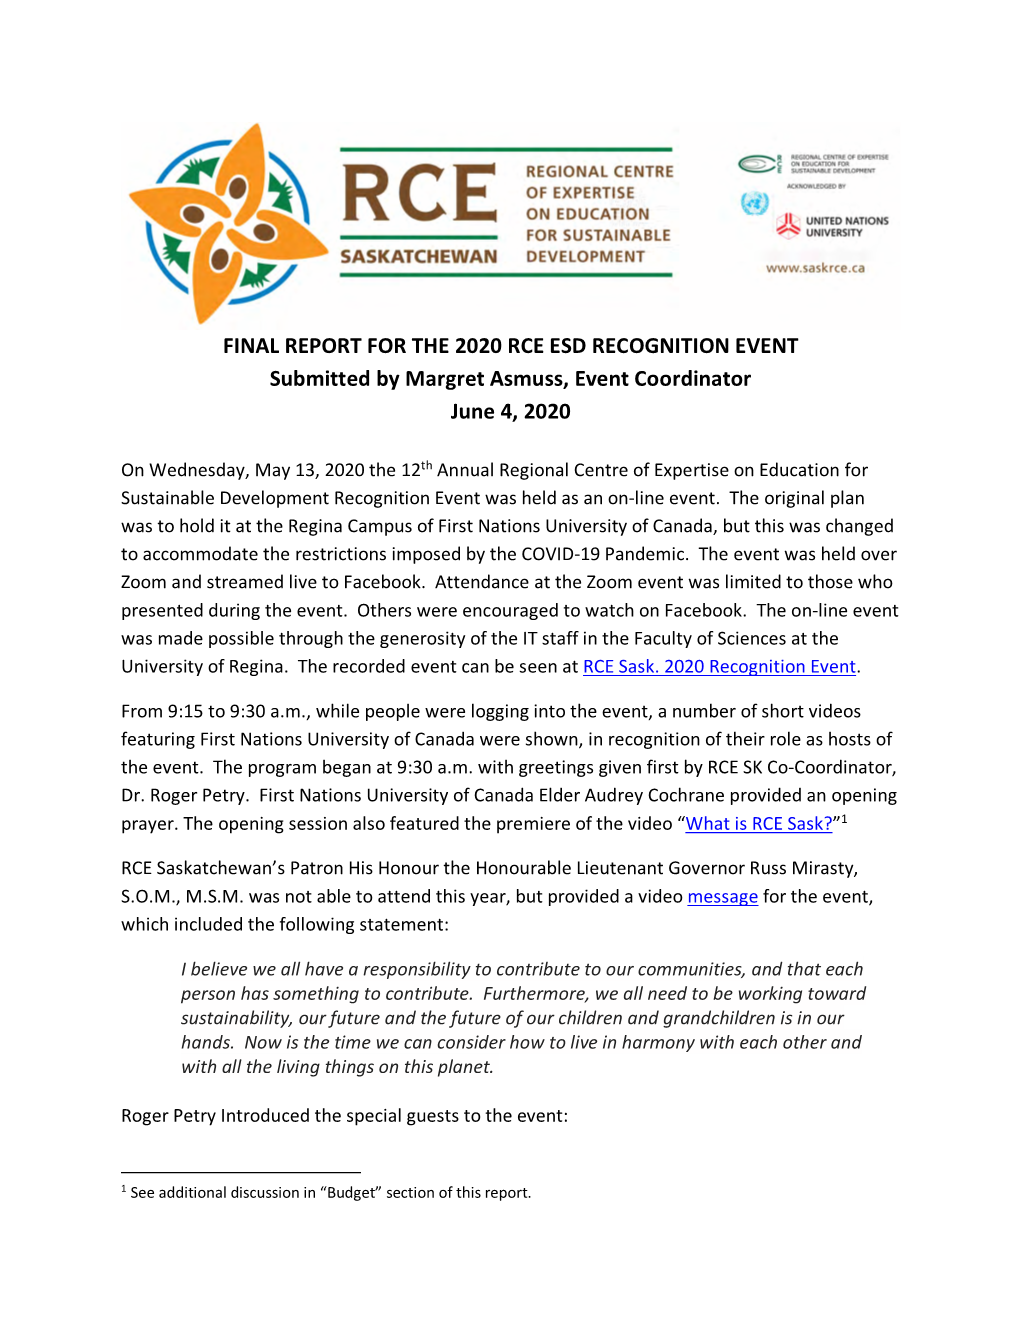 FINAL REPORT for the 2020 RCE ESD RECOGNITION EVENT Submitted by Margret Asmuss, Event Coordinator June 4, 2020